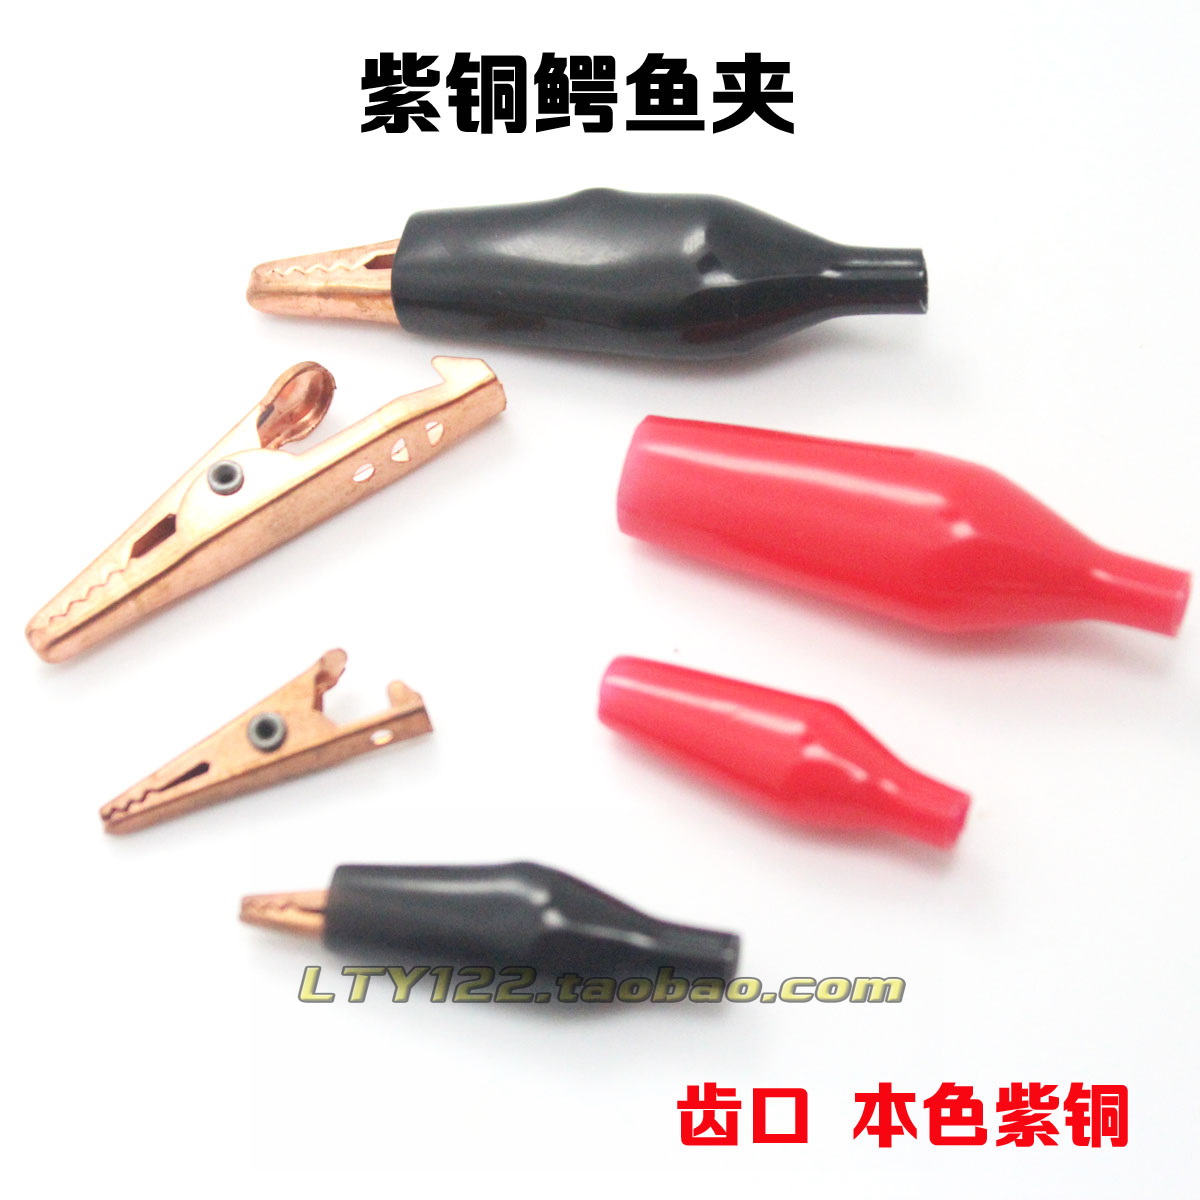 Copper electrician clamp alligator clamp sheath clamp power supply wire test clamp insulating sleeve copper conductive corrosion resistance